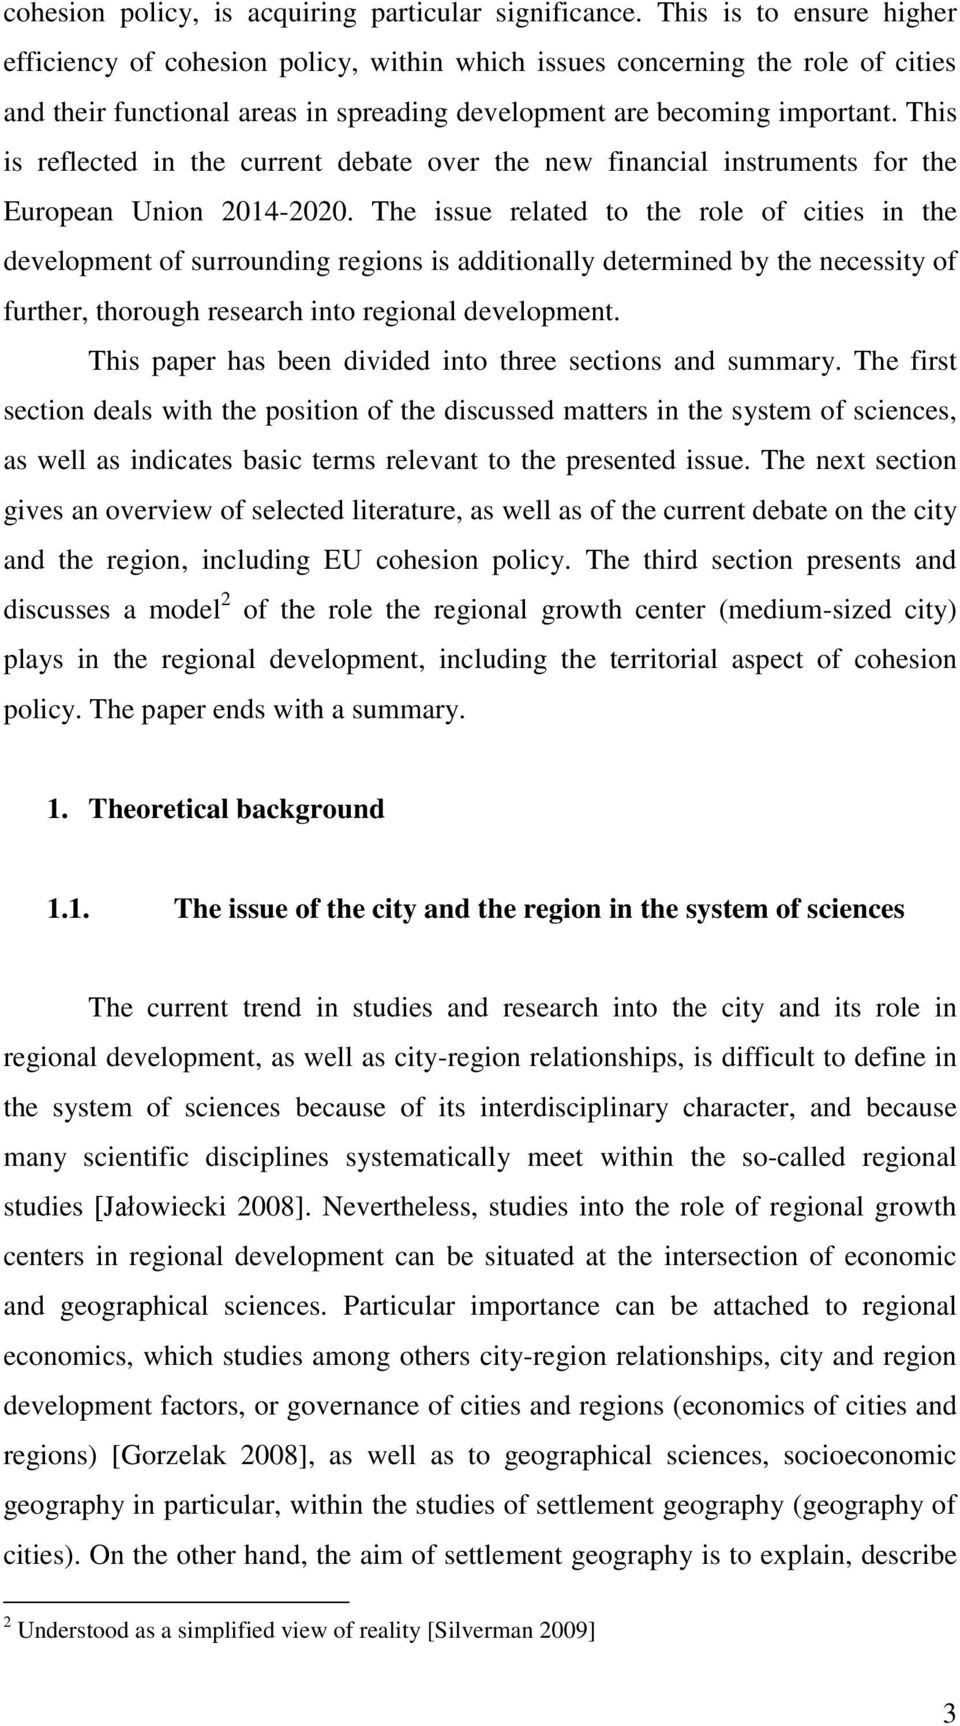 This is reflected in the current debate over the new financial instruments for the European Union 2014-2020.